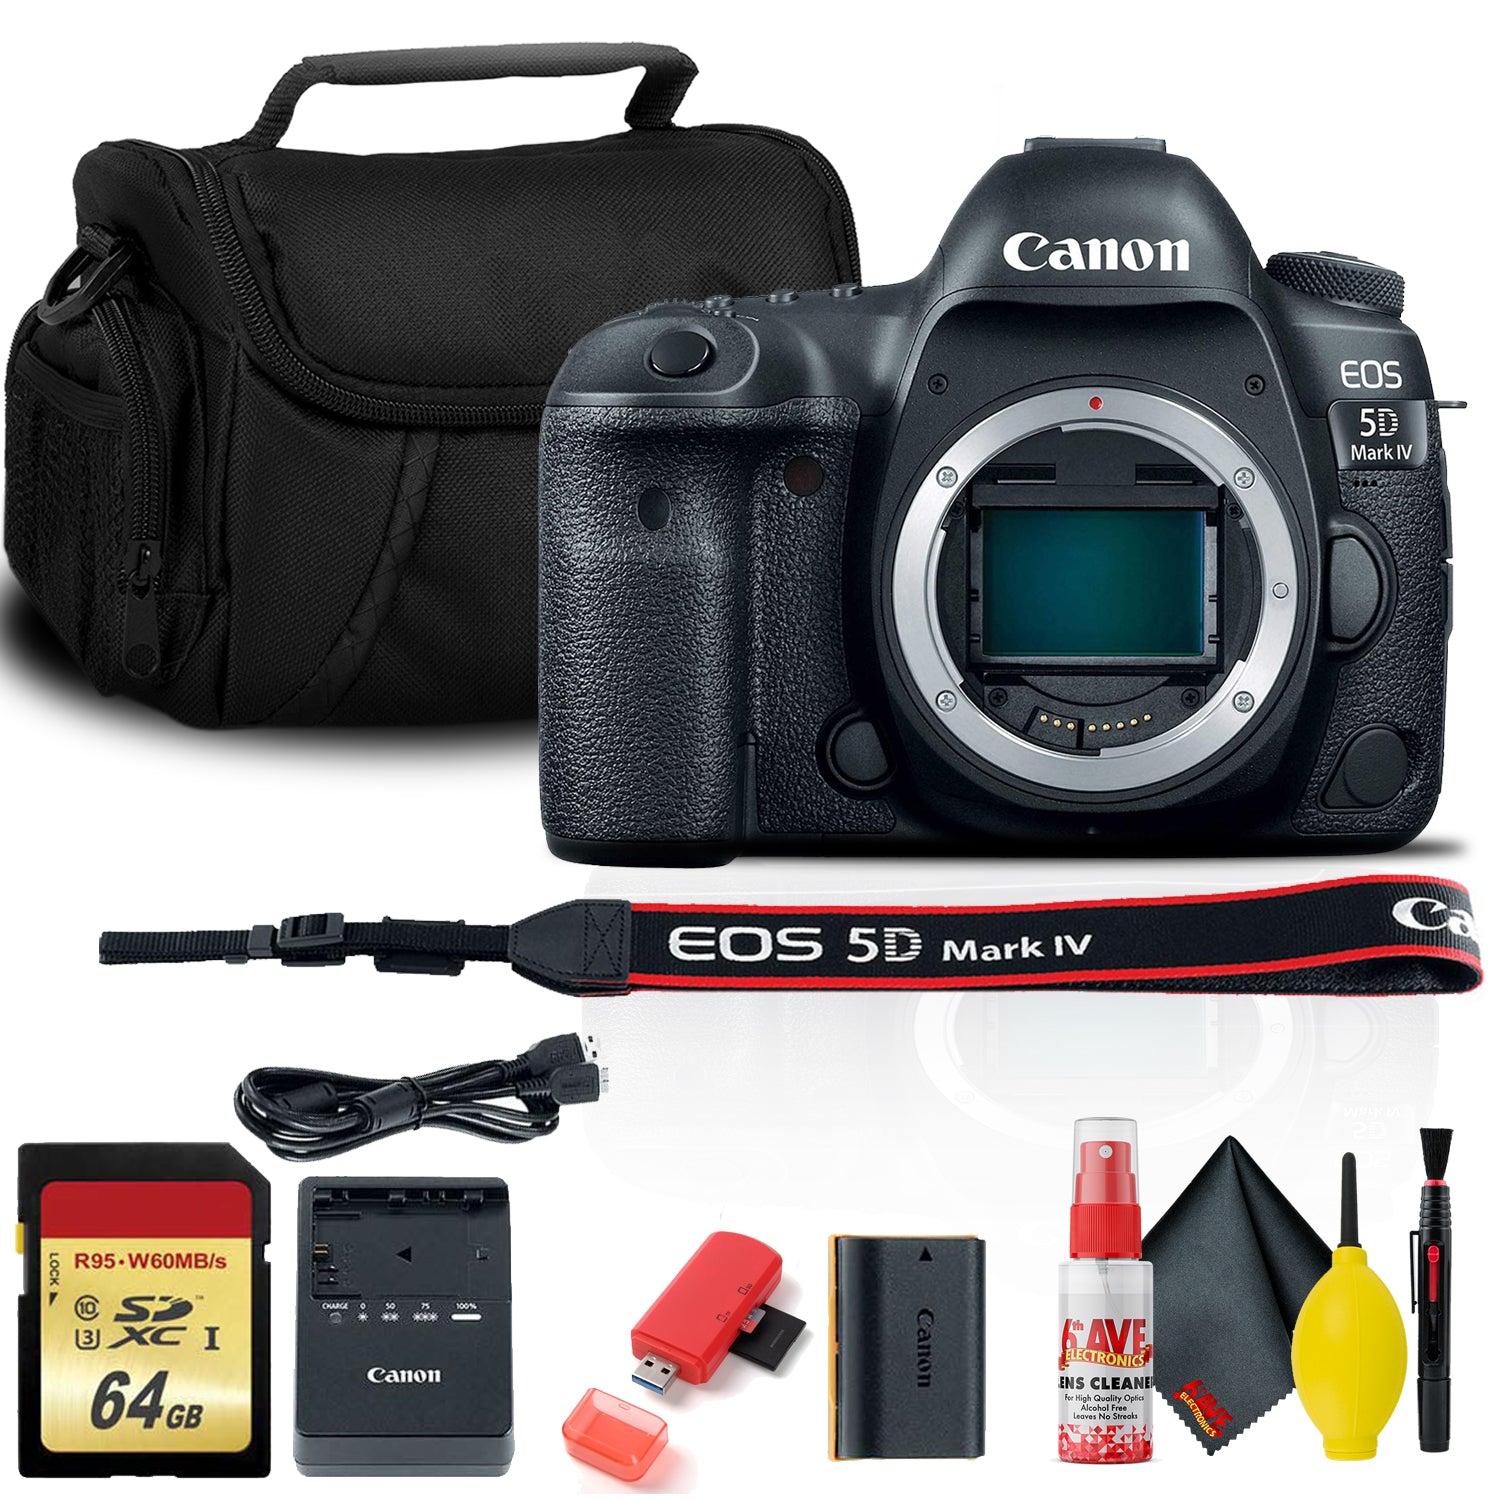 Canon EOS 5D Mark IV DSLR Camera (1483C002) with 64GB Memory Card, Case, Cleaning Set and More - S Bundle